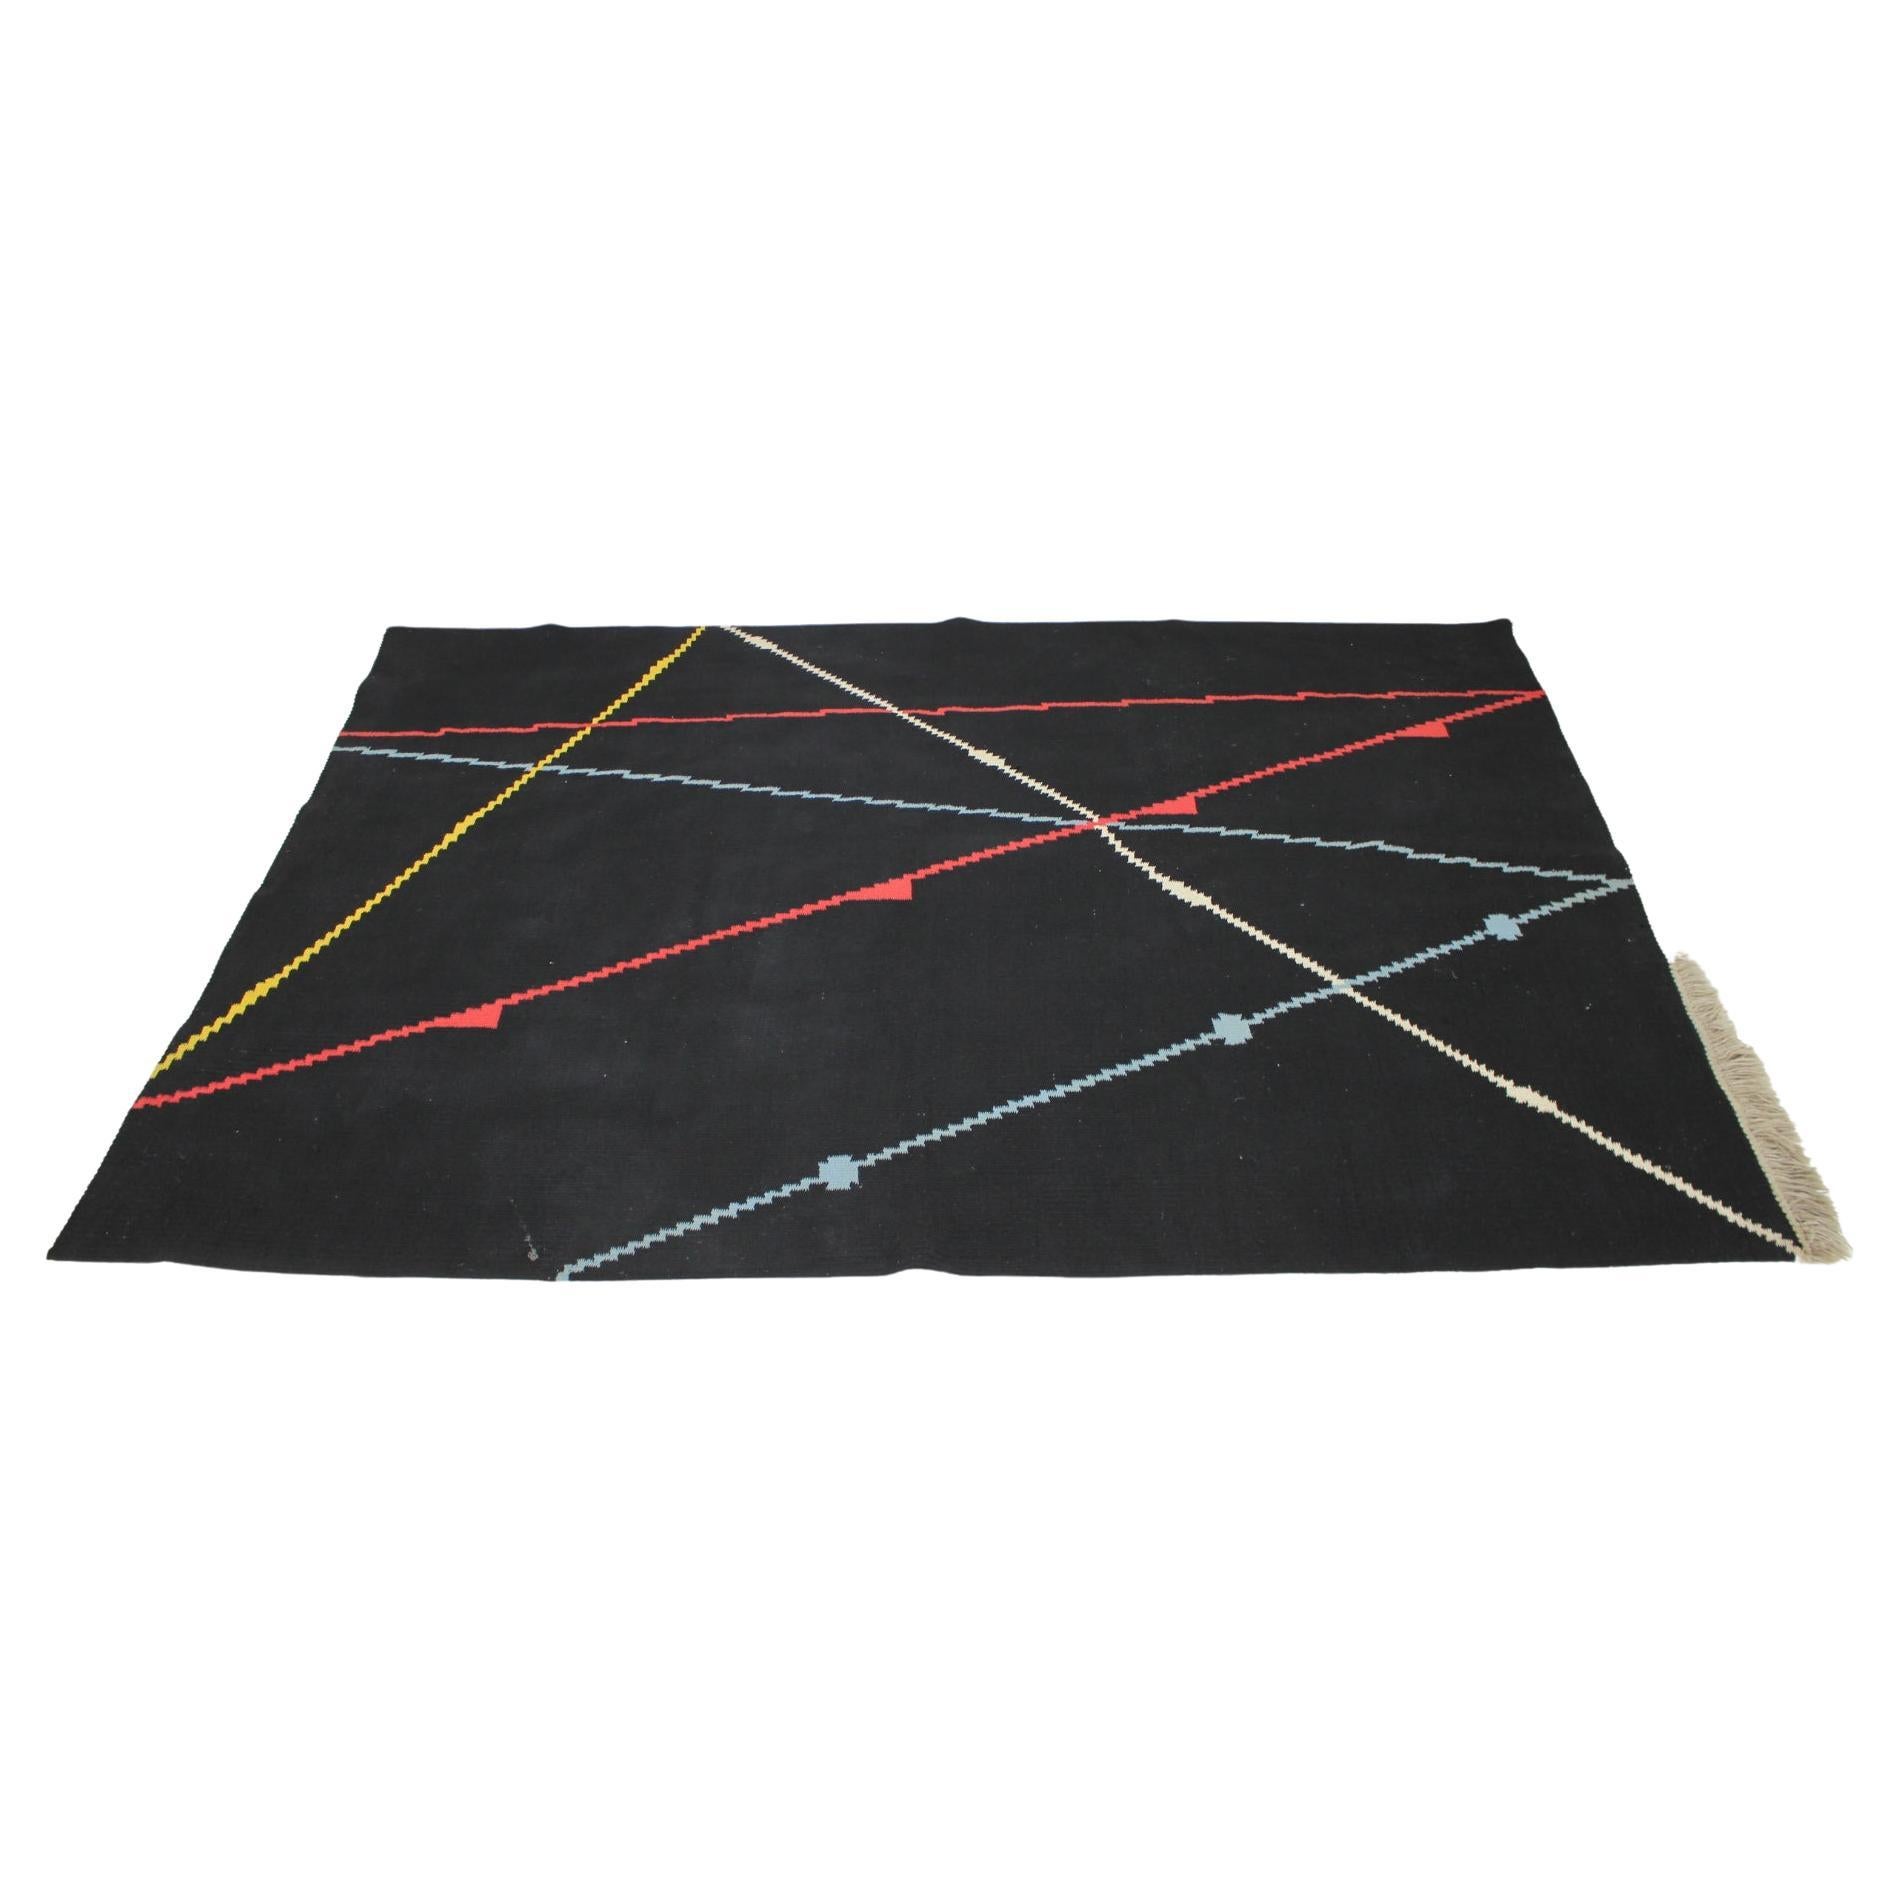 1940s Bauhaus Geometric Carpet/Rug, Up to 2 Items Available For Sale